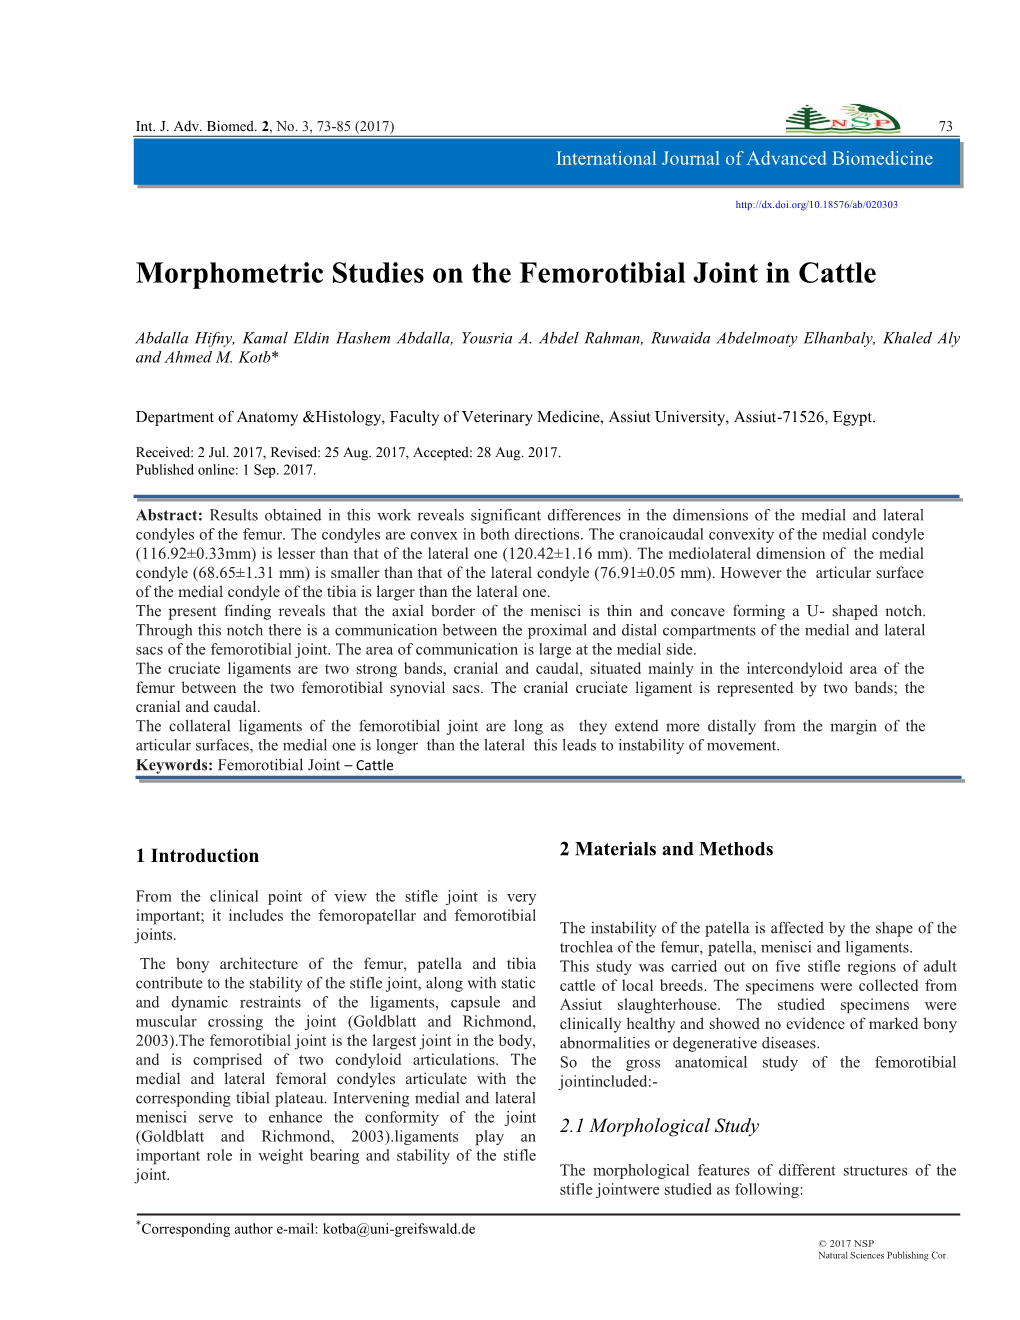 Morphometric Studies on the Femorotibial Joint in Cattle